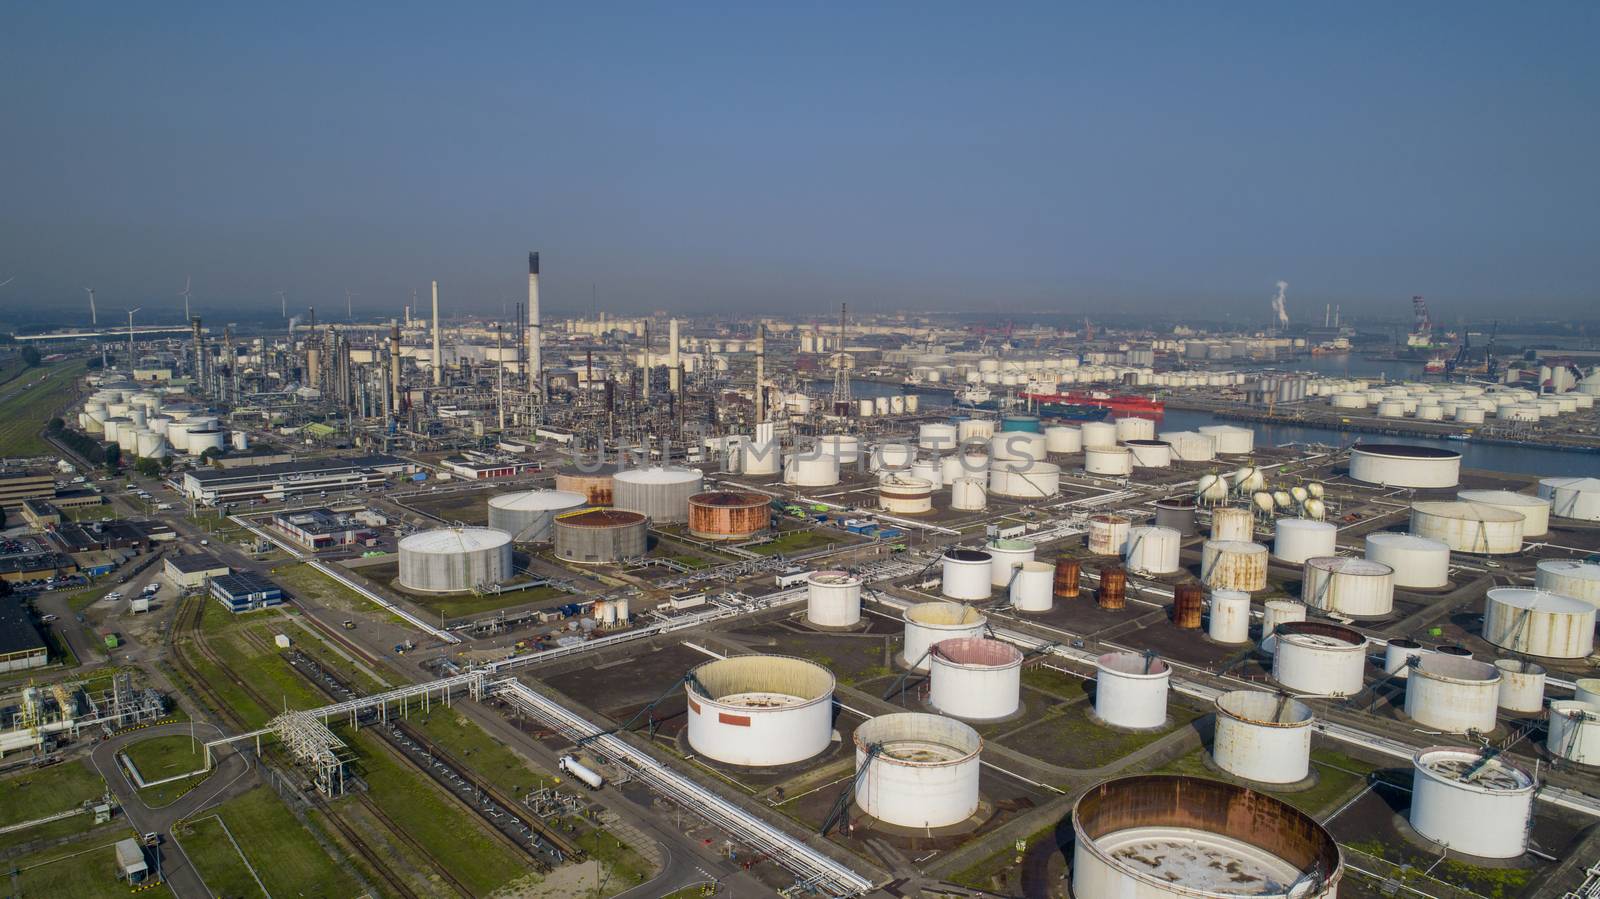 Port of Rotterdam. Botlek. Oil refinery plant from industry zone by Tjeerdkruse